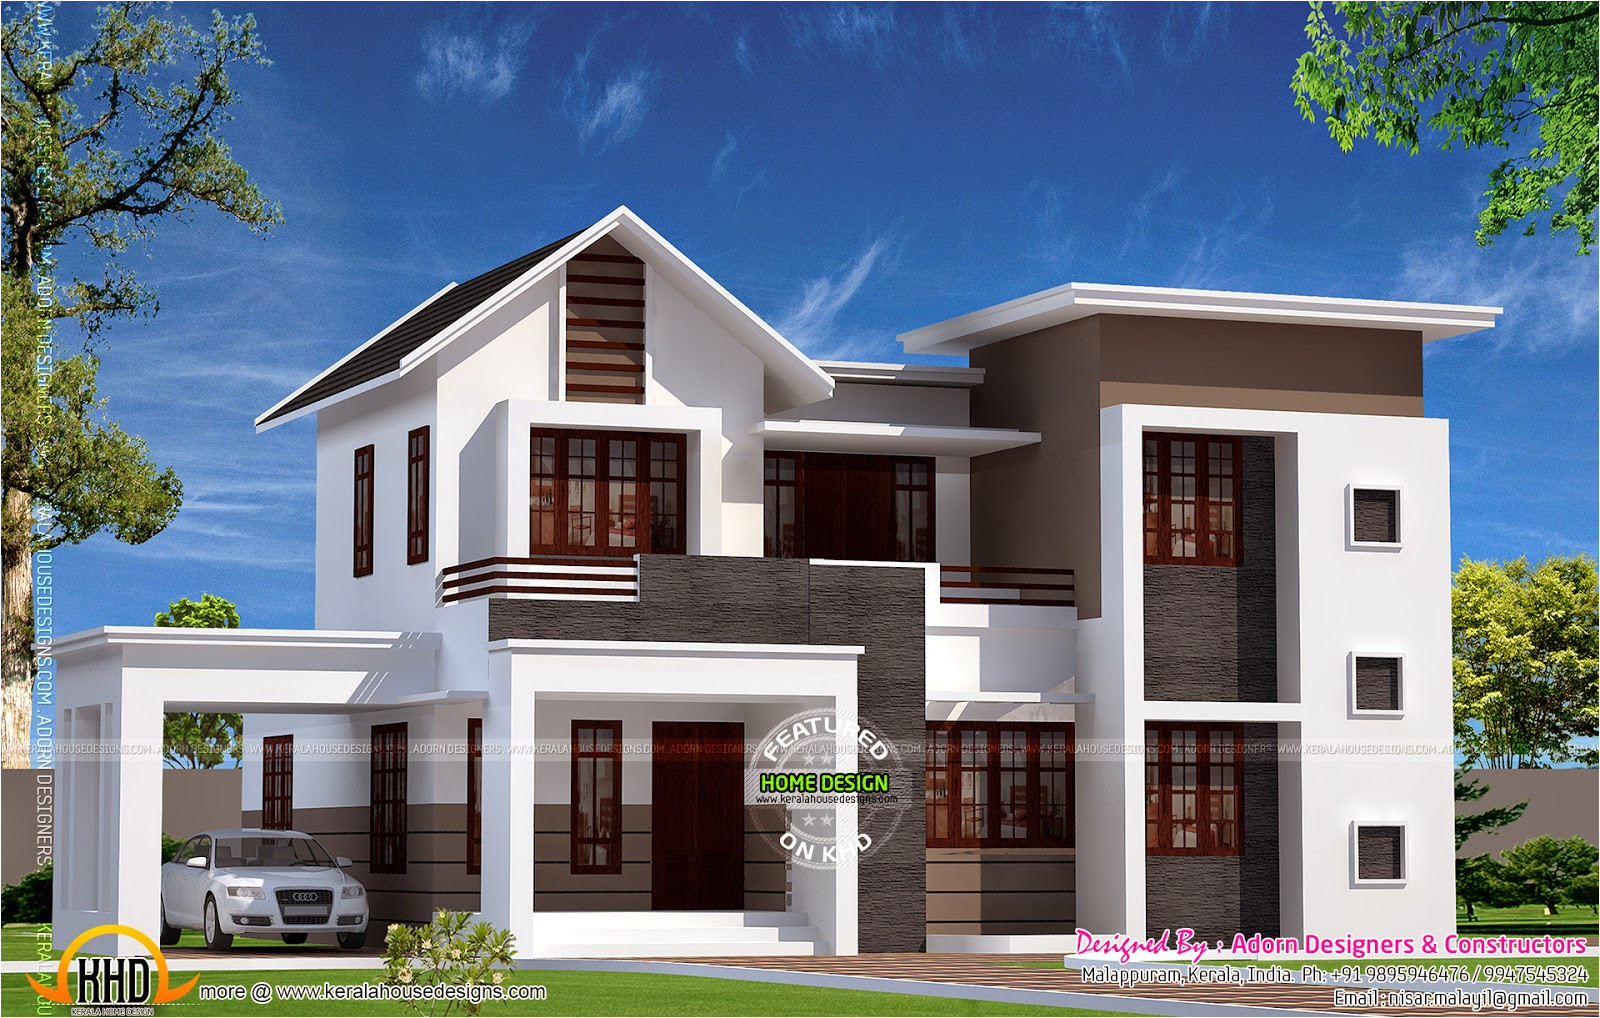 New Home Designs and Plans New House Design In 1900 Sq Feet Kerala Home Design and